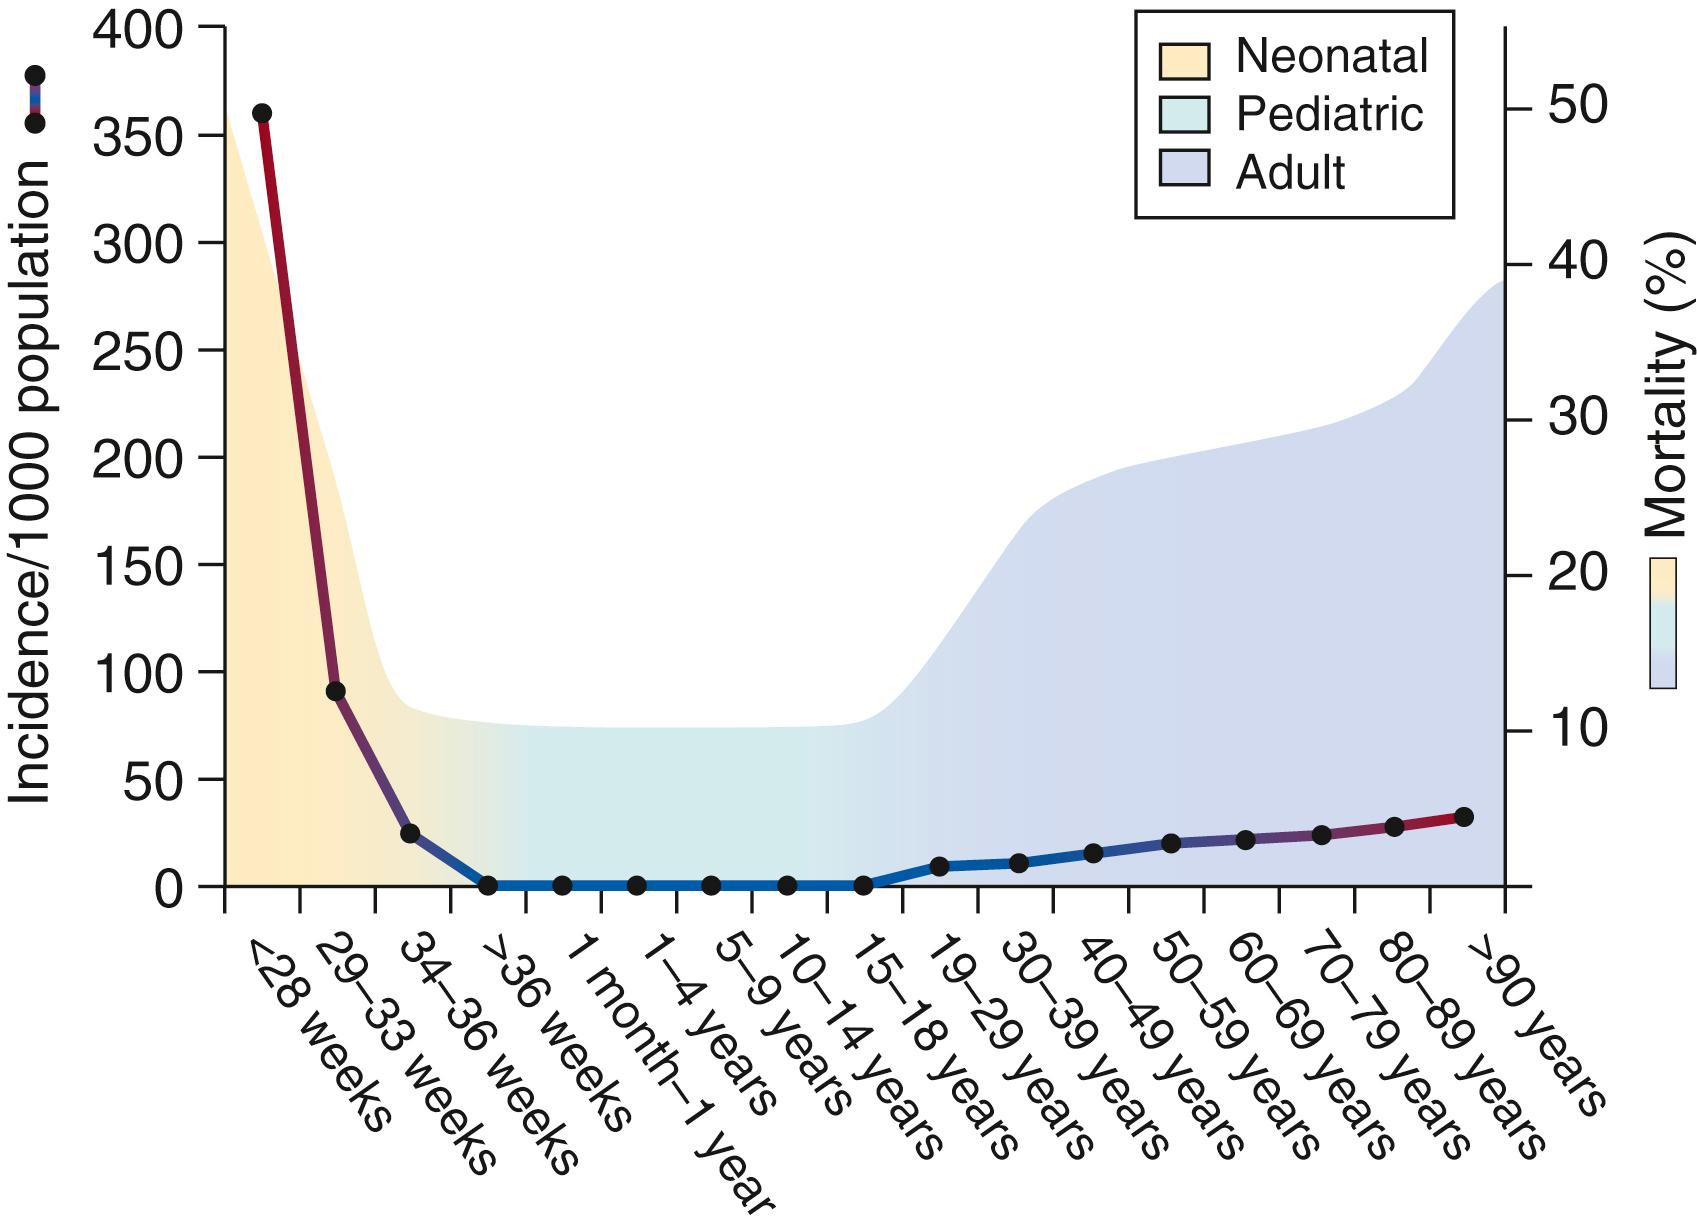 Fig. 151.1, Incidence and mortality of sepsis in humans across developmental age groups. Incidence ( line, left y-axis), mortality ( shade, right y-axis).